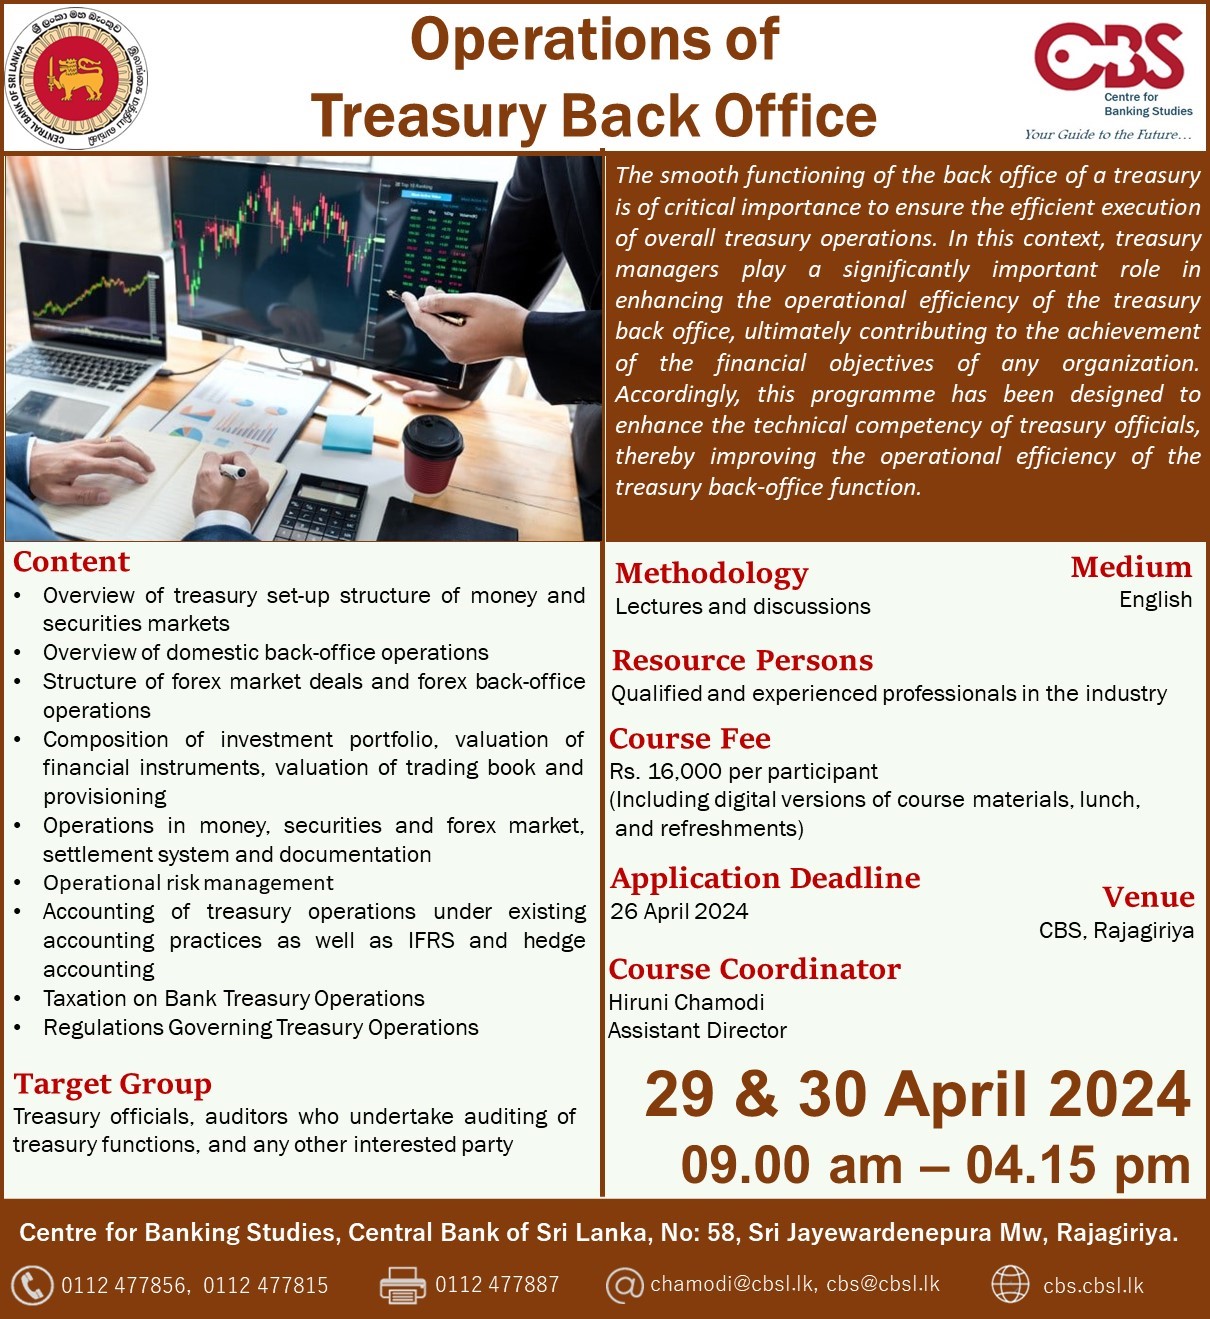 Programme on Operations of Treasury Back Office 29 & 30 April 2024